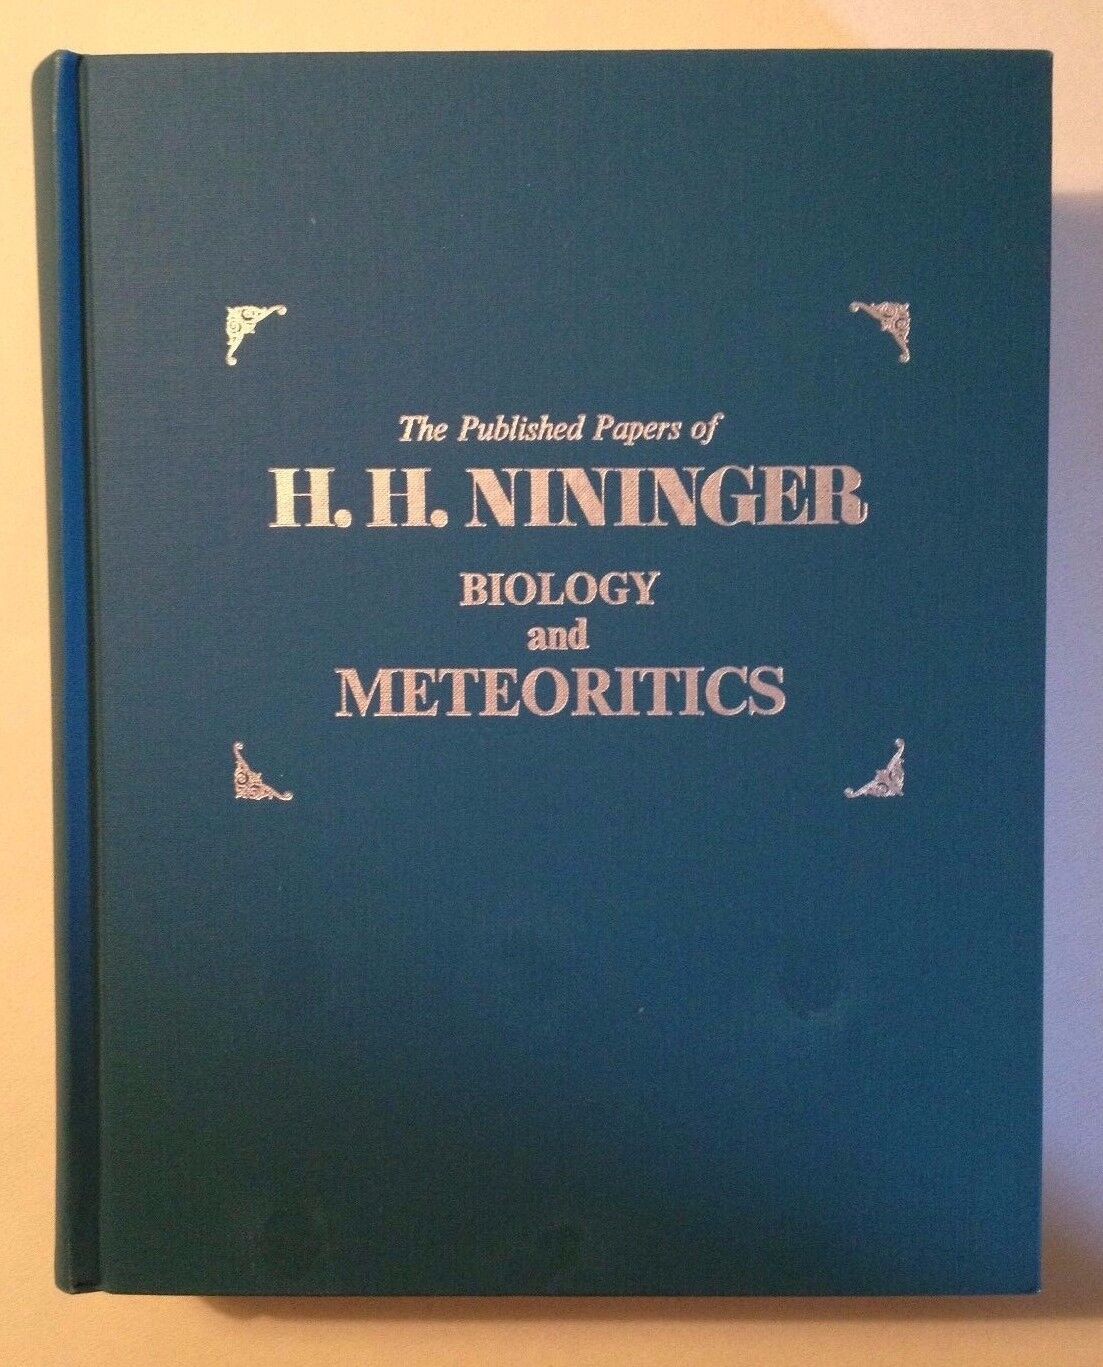 The Published Papers of H. H. Nininger- Biology and Meteoritics (Hardcover)